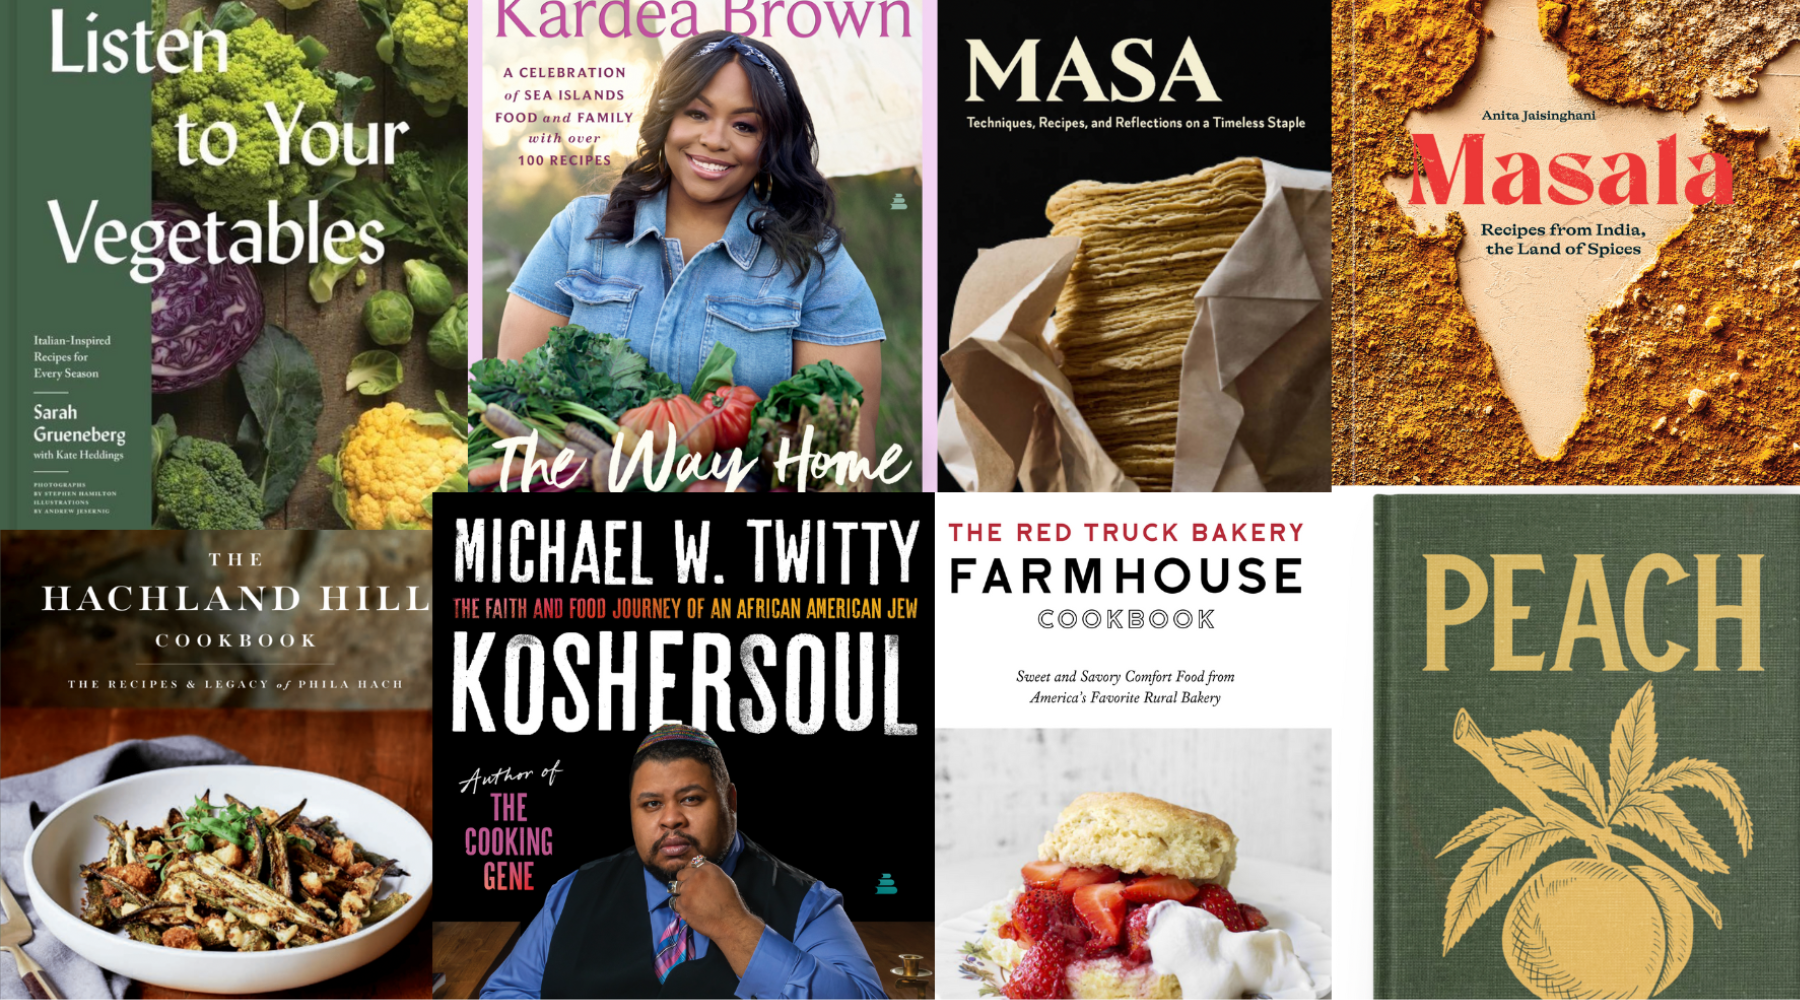 Banner of Winter 2022 Cookbooks, including Listen to Your Vegetables, The Way Home, Masa, Masala, Hachland Hill Cookbook, KosherSoul, Red Truck Bakery Farm House, Peach